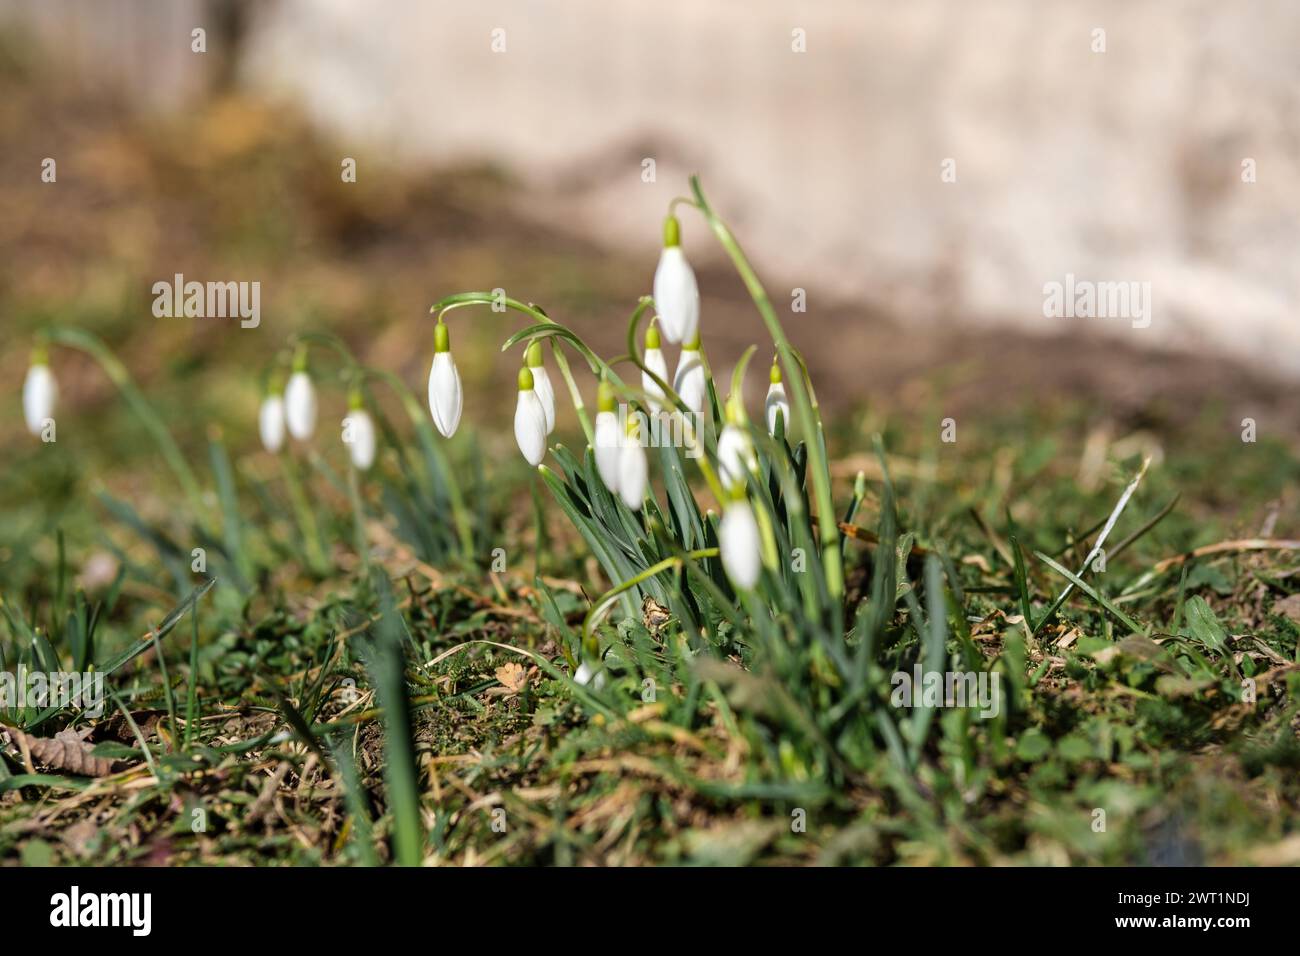 Snowdrops in Latvia's meadows symbolize hope, as nature awakens from its winter slumber. Stock Photo